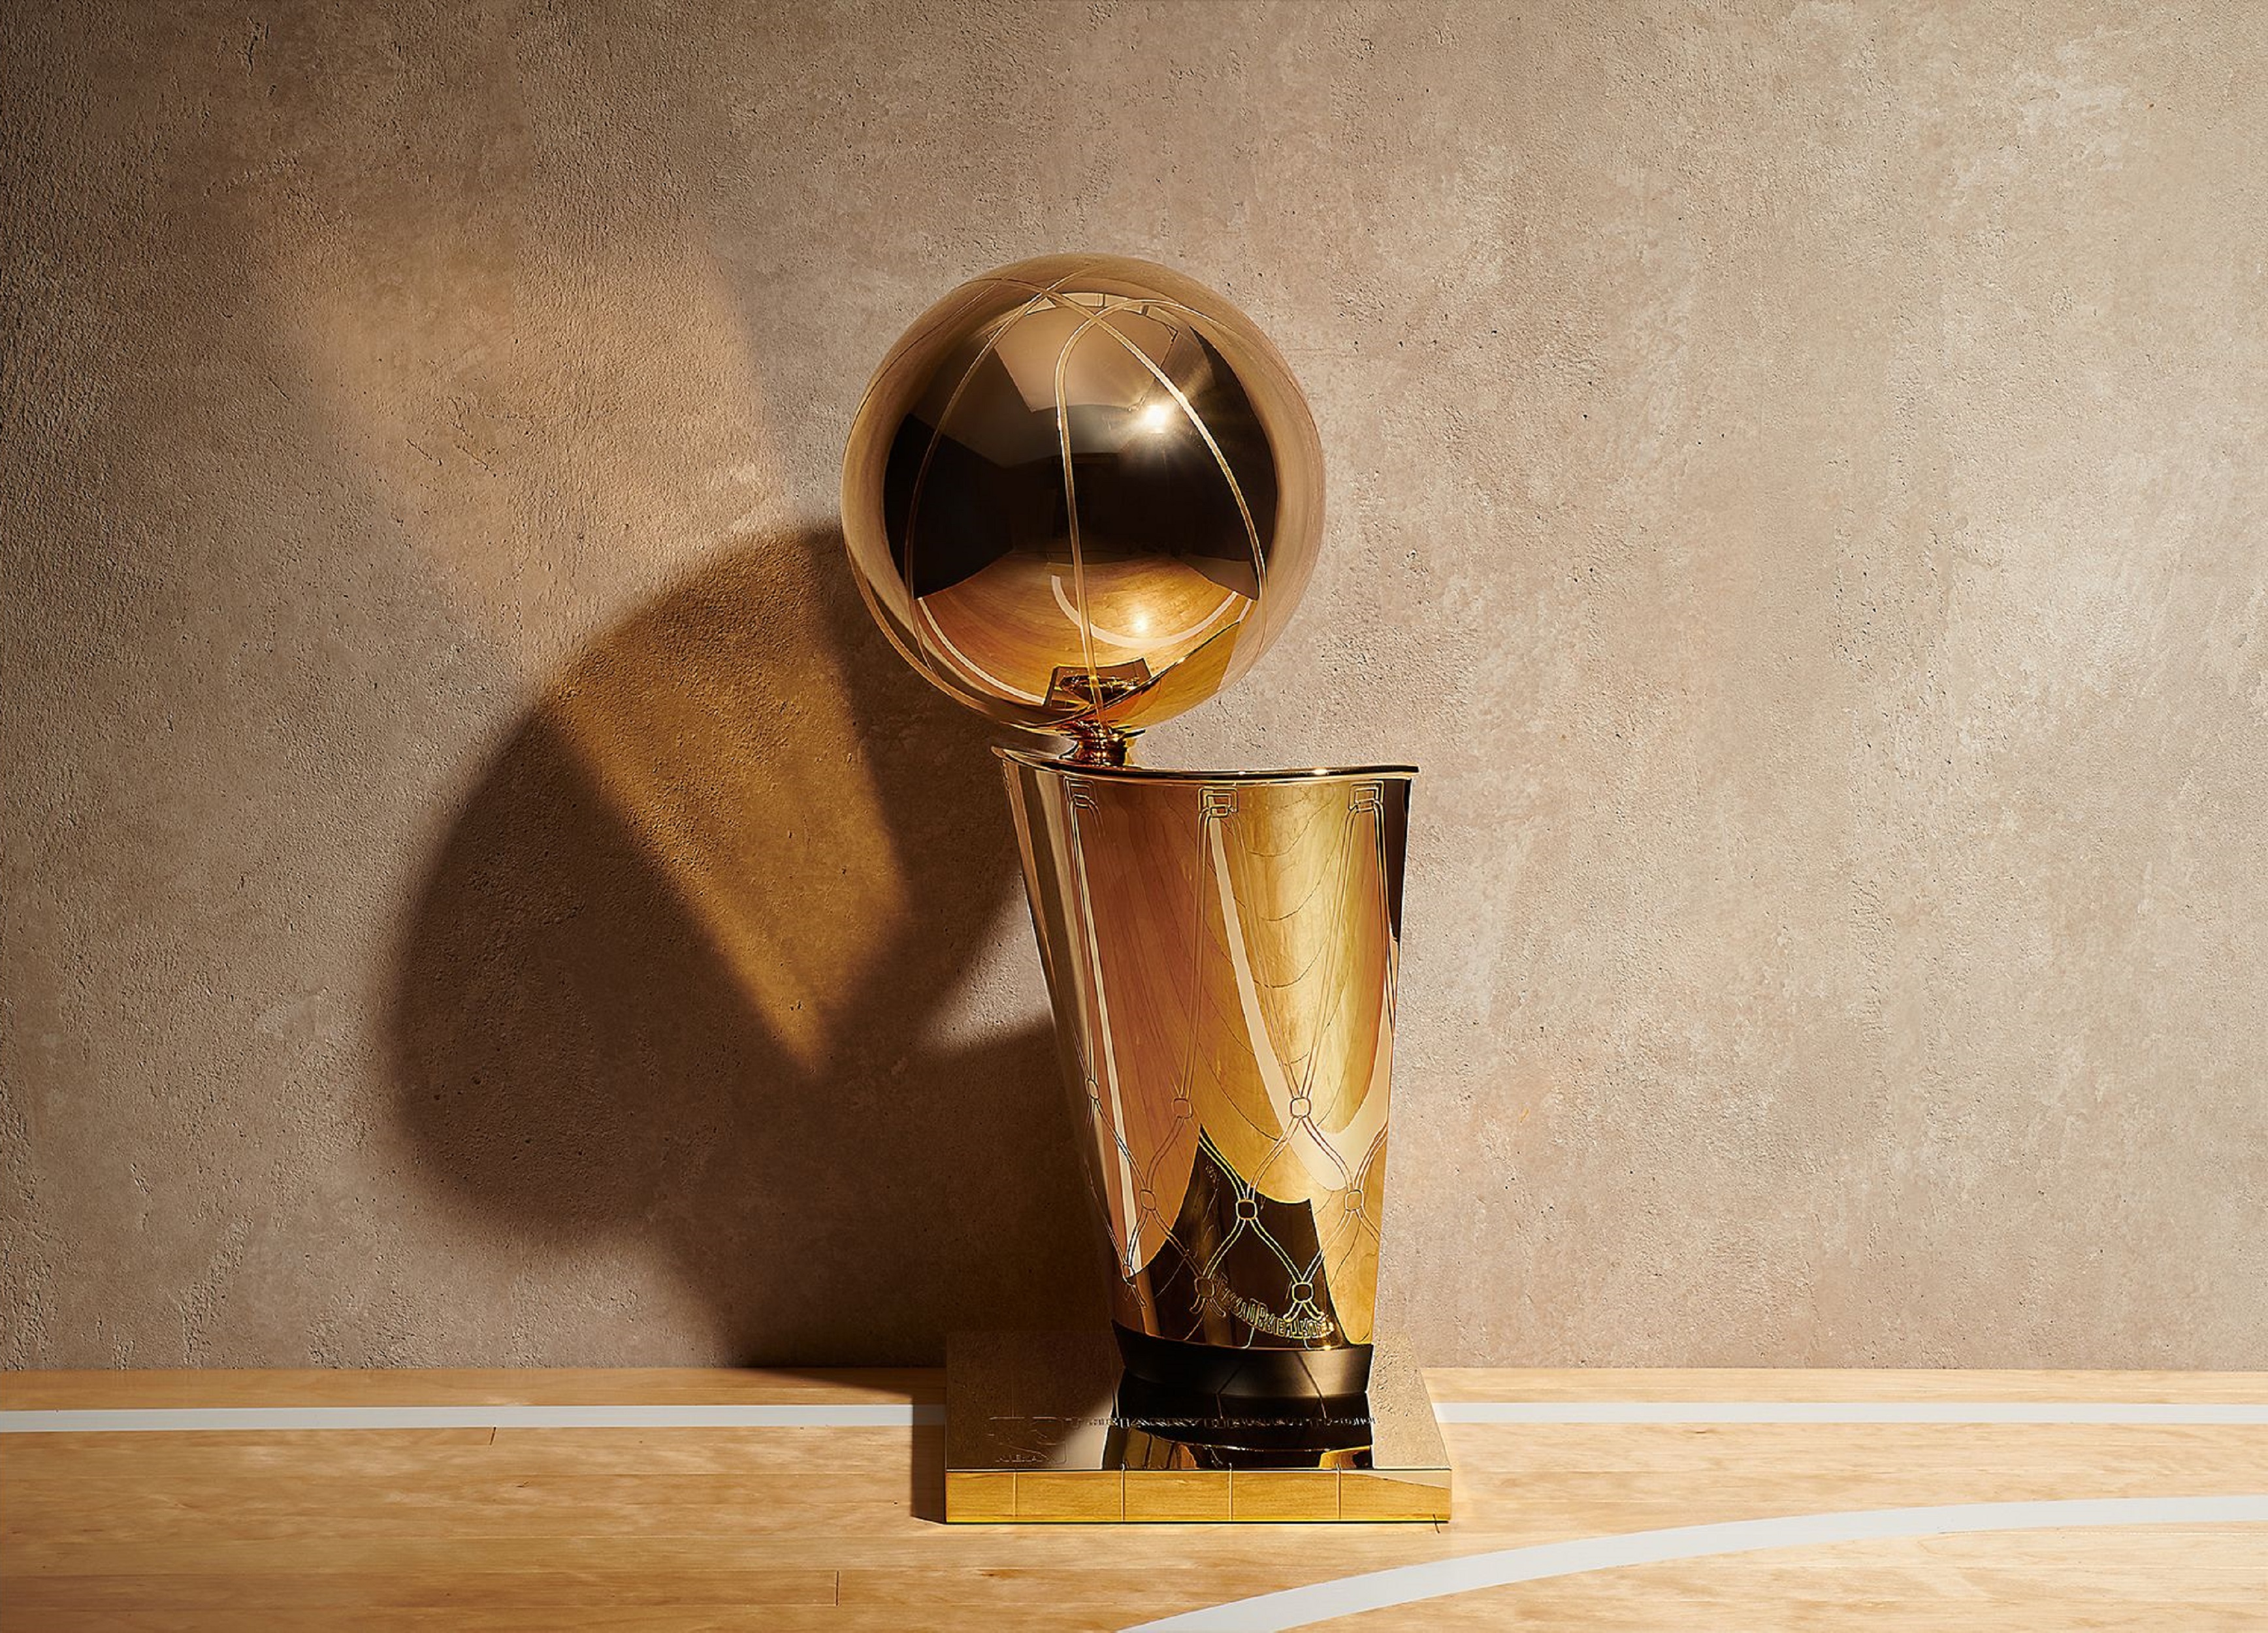 NBA x Tiffany & Co. unveiled reimagined trophies for the NBA